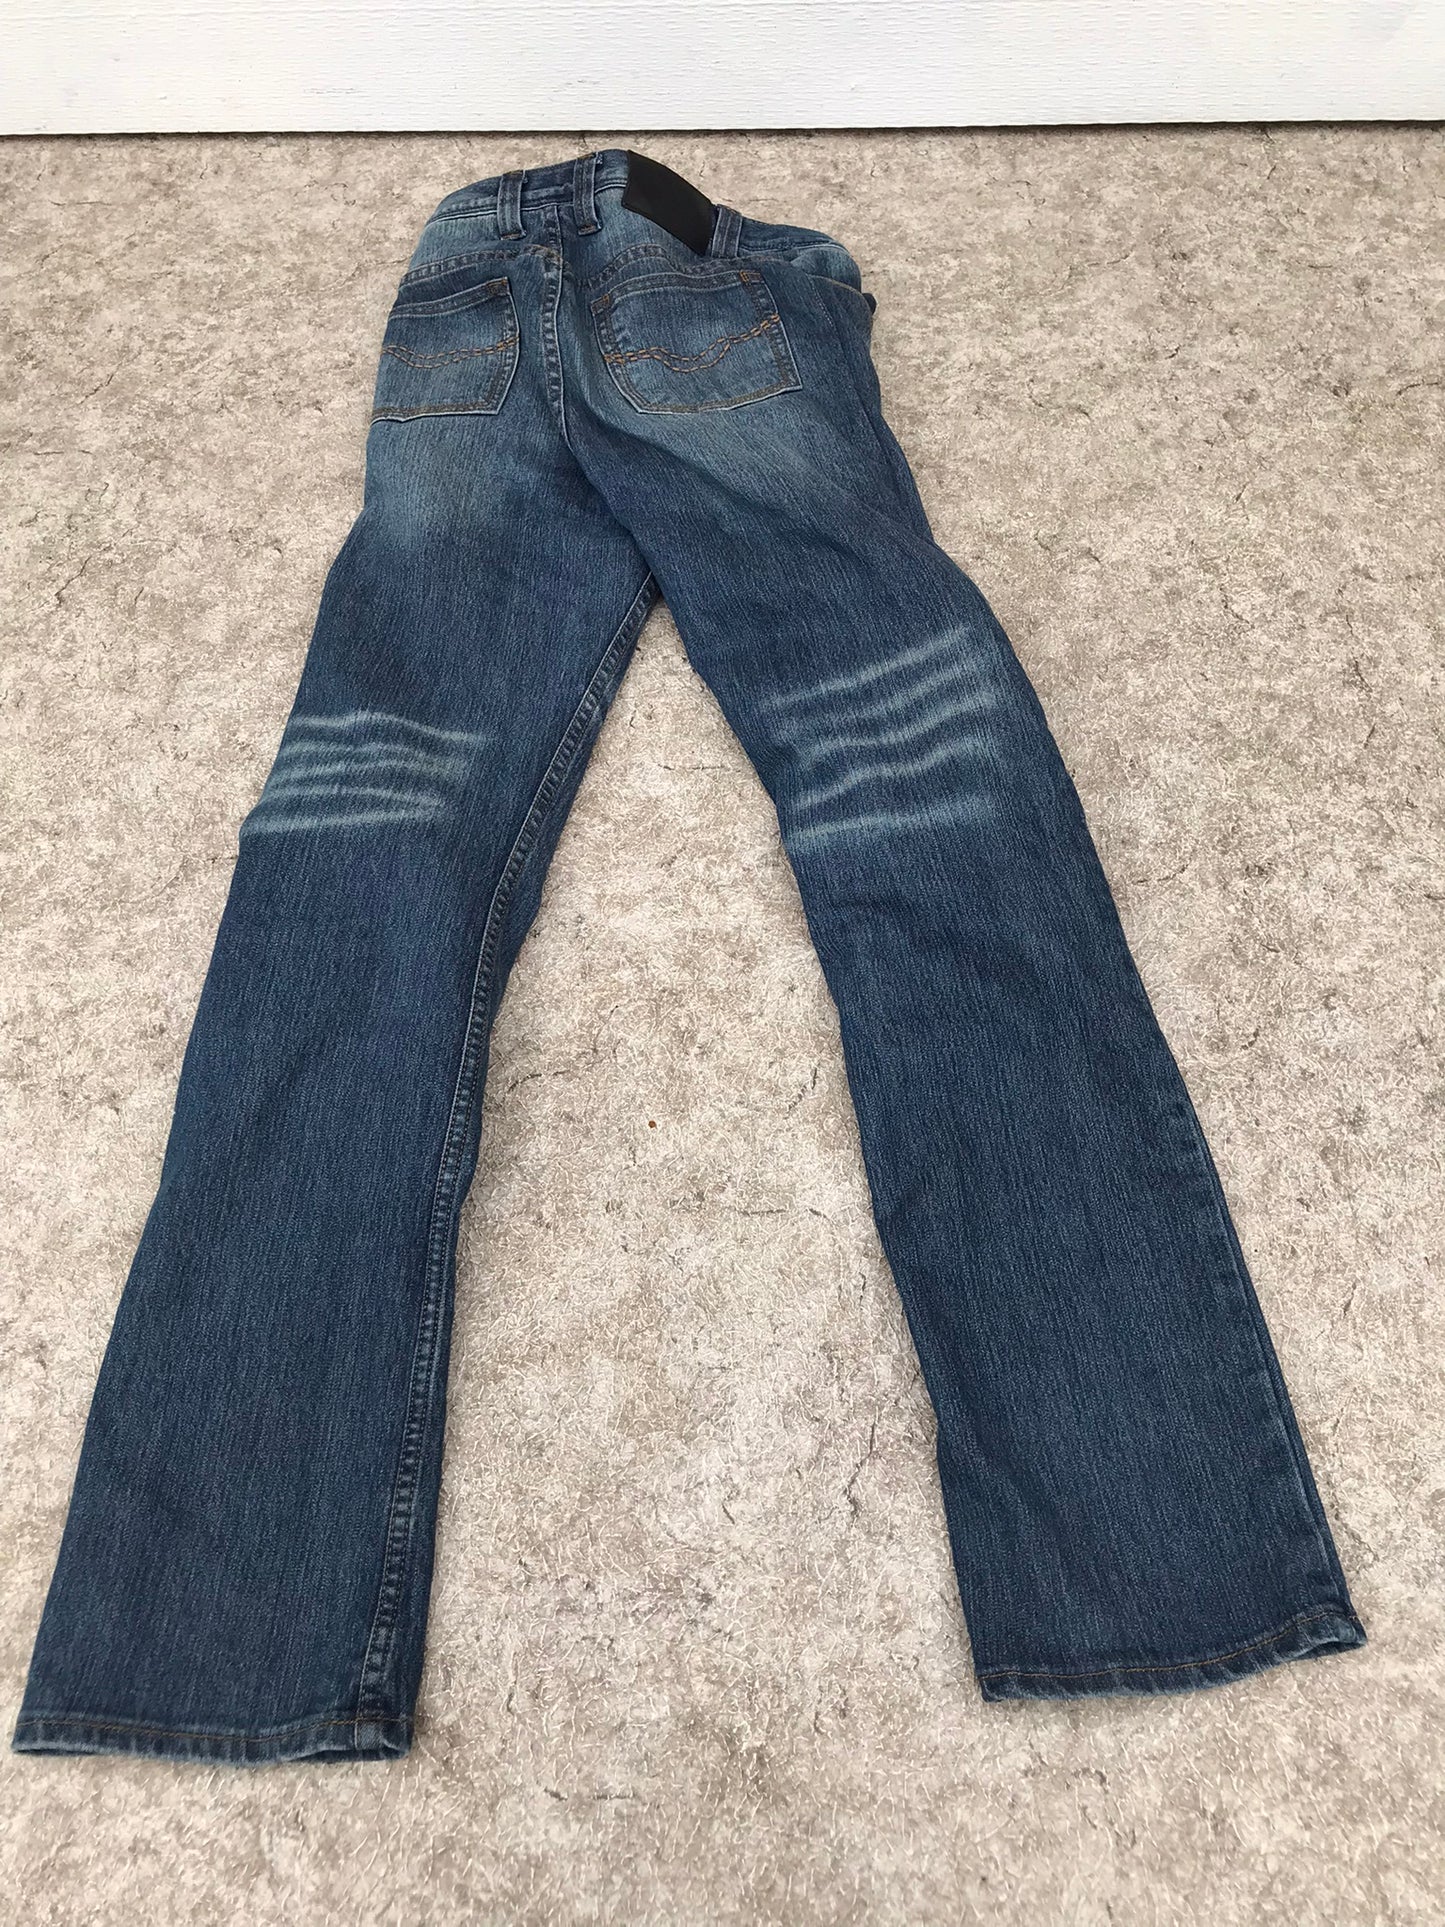 Harley Davidson Motorcycle Riding Jeans Men's Size 32 inch With Evo Hip and Knee Full Armour As New Never Worn Outstanding Quality